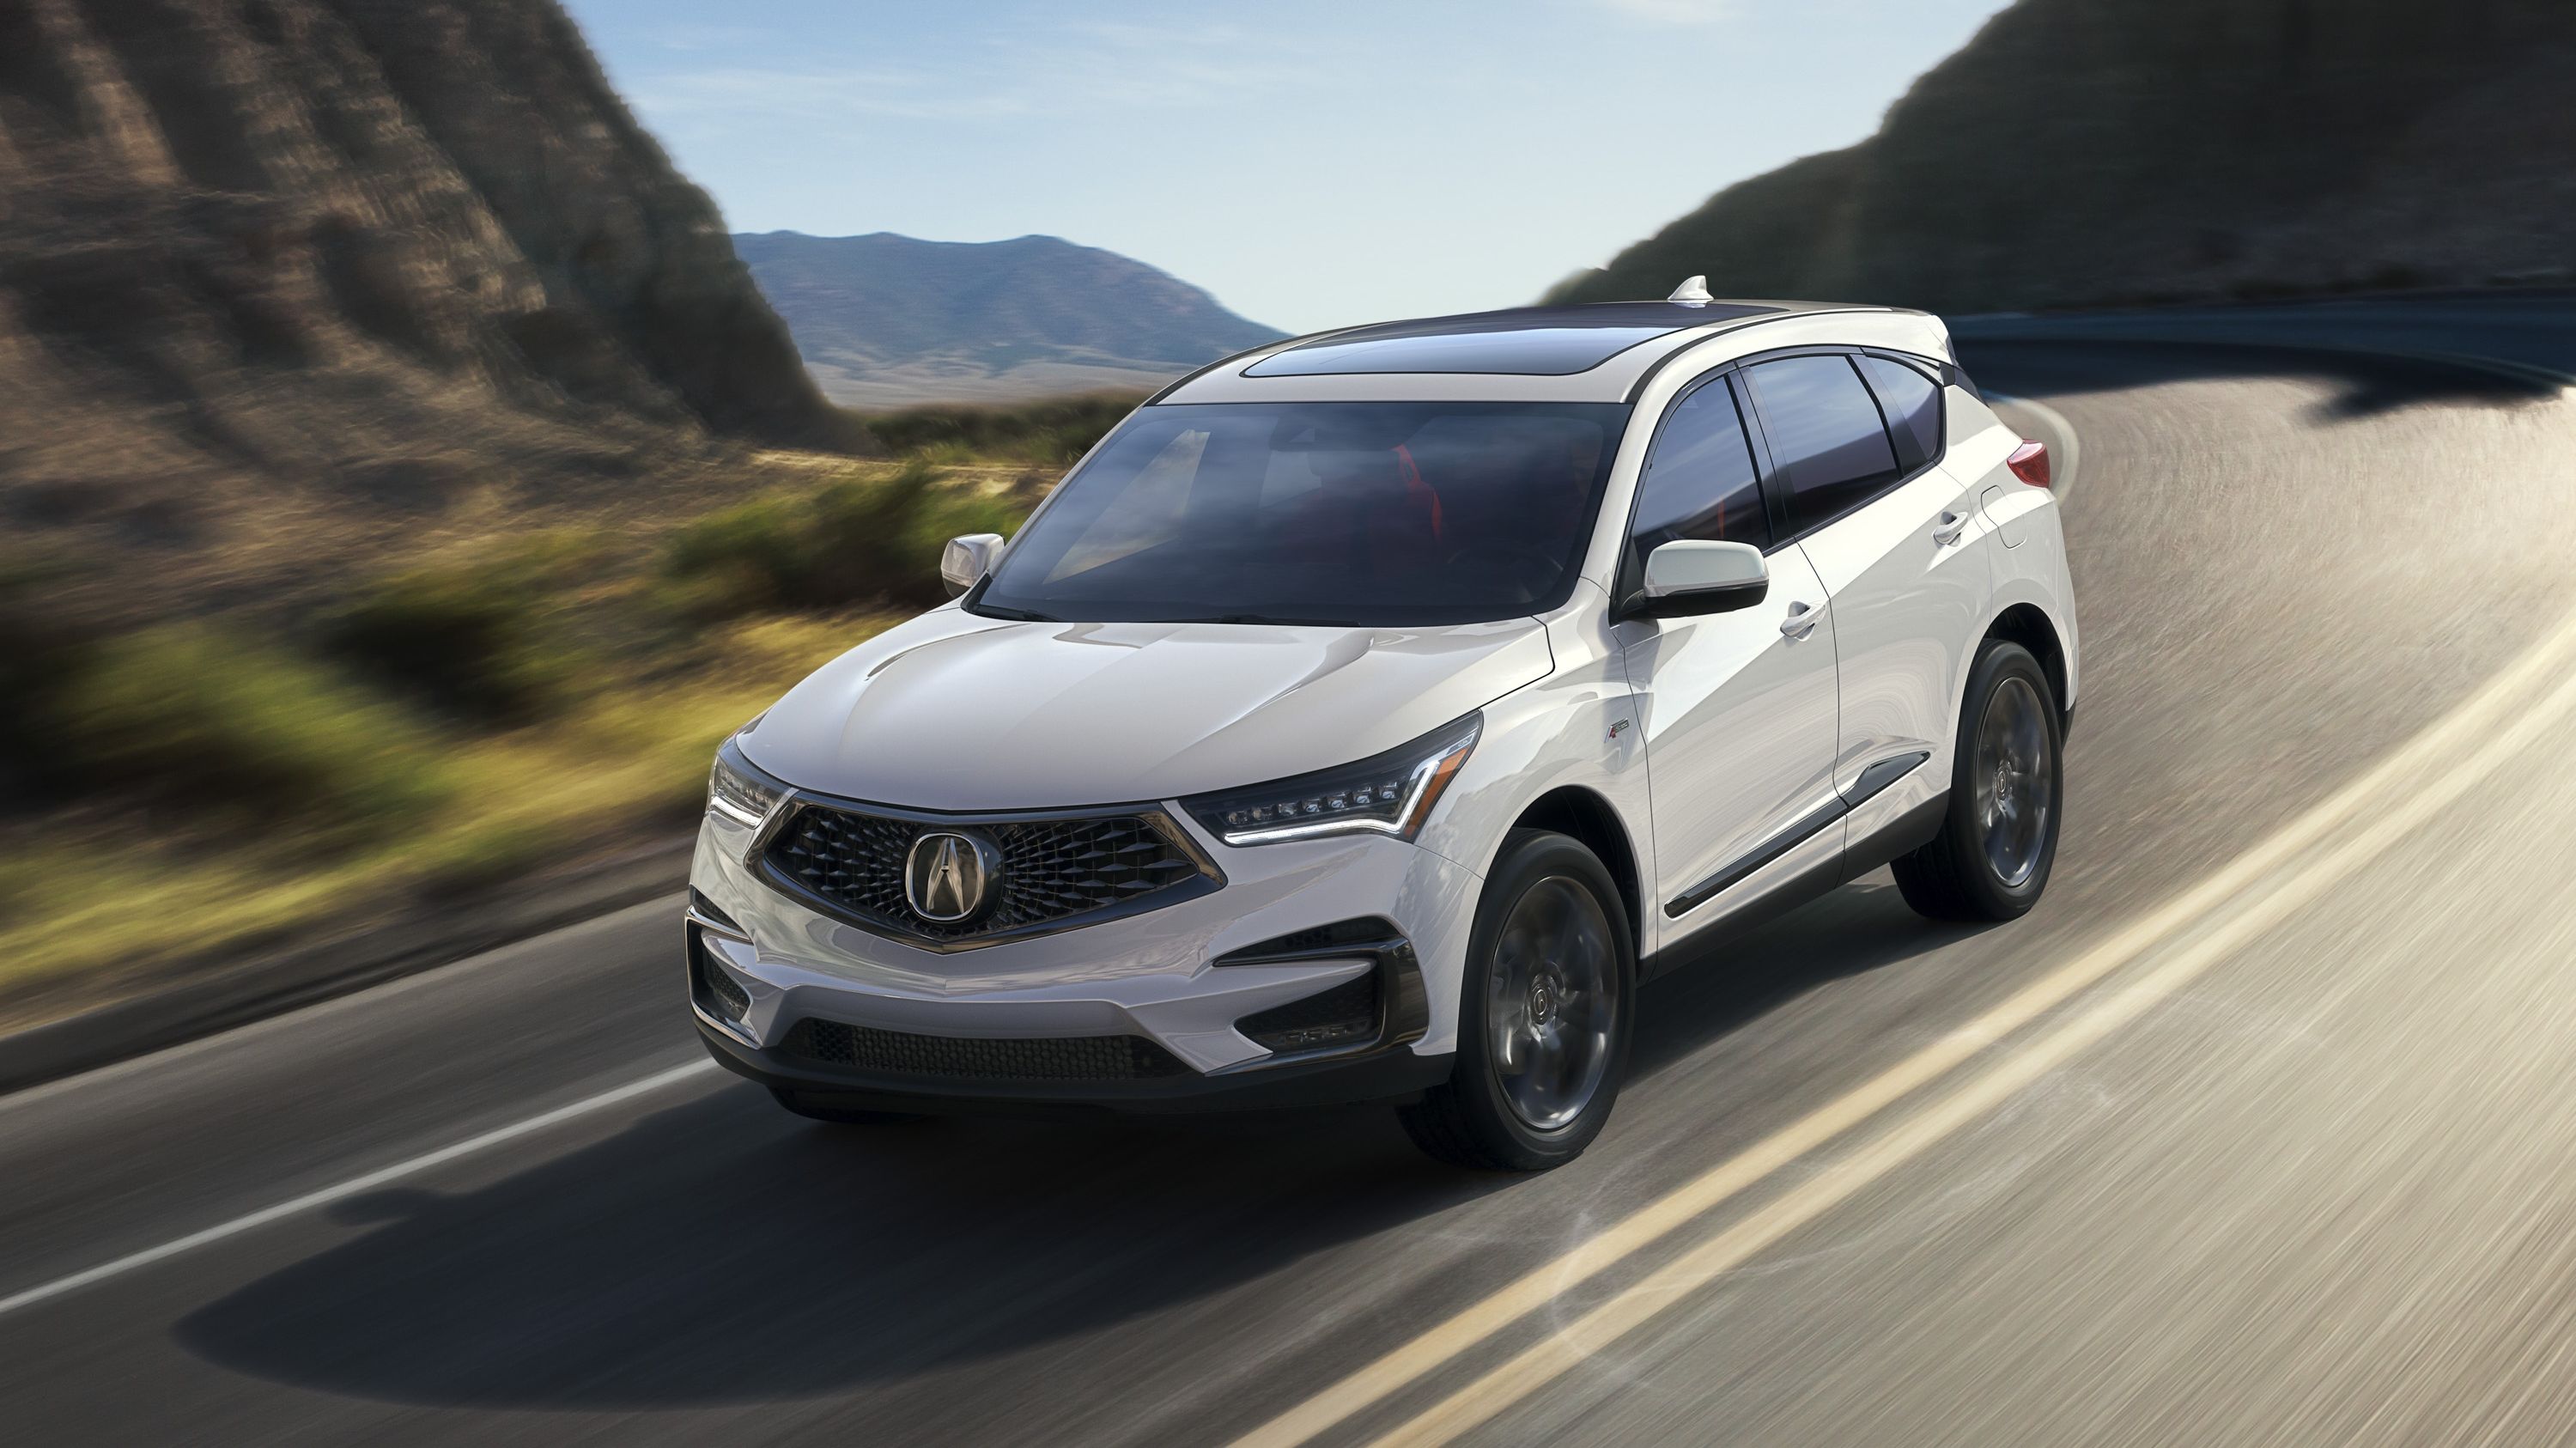 2016 - 2018 The New Acura RDX Takes the Stage as BMW and Audi Fanboys Shed Tears of Jealousy, Hate, and Resentment